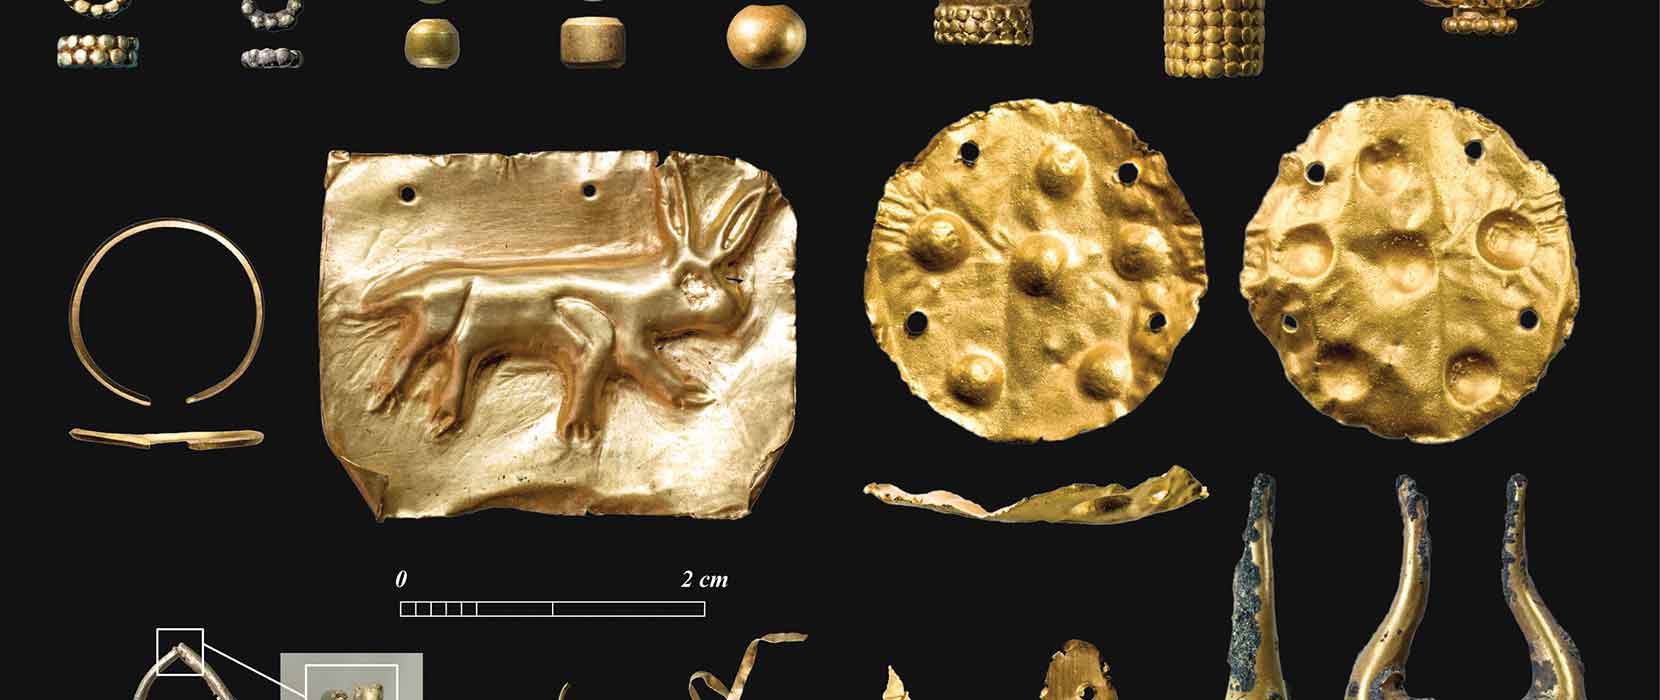 Gold and electrum jewellery excavated from the sands of Saruq al Hadid on a black background